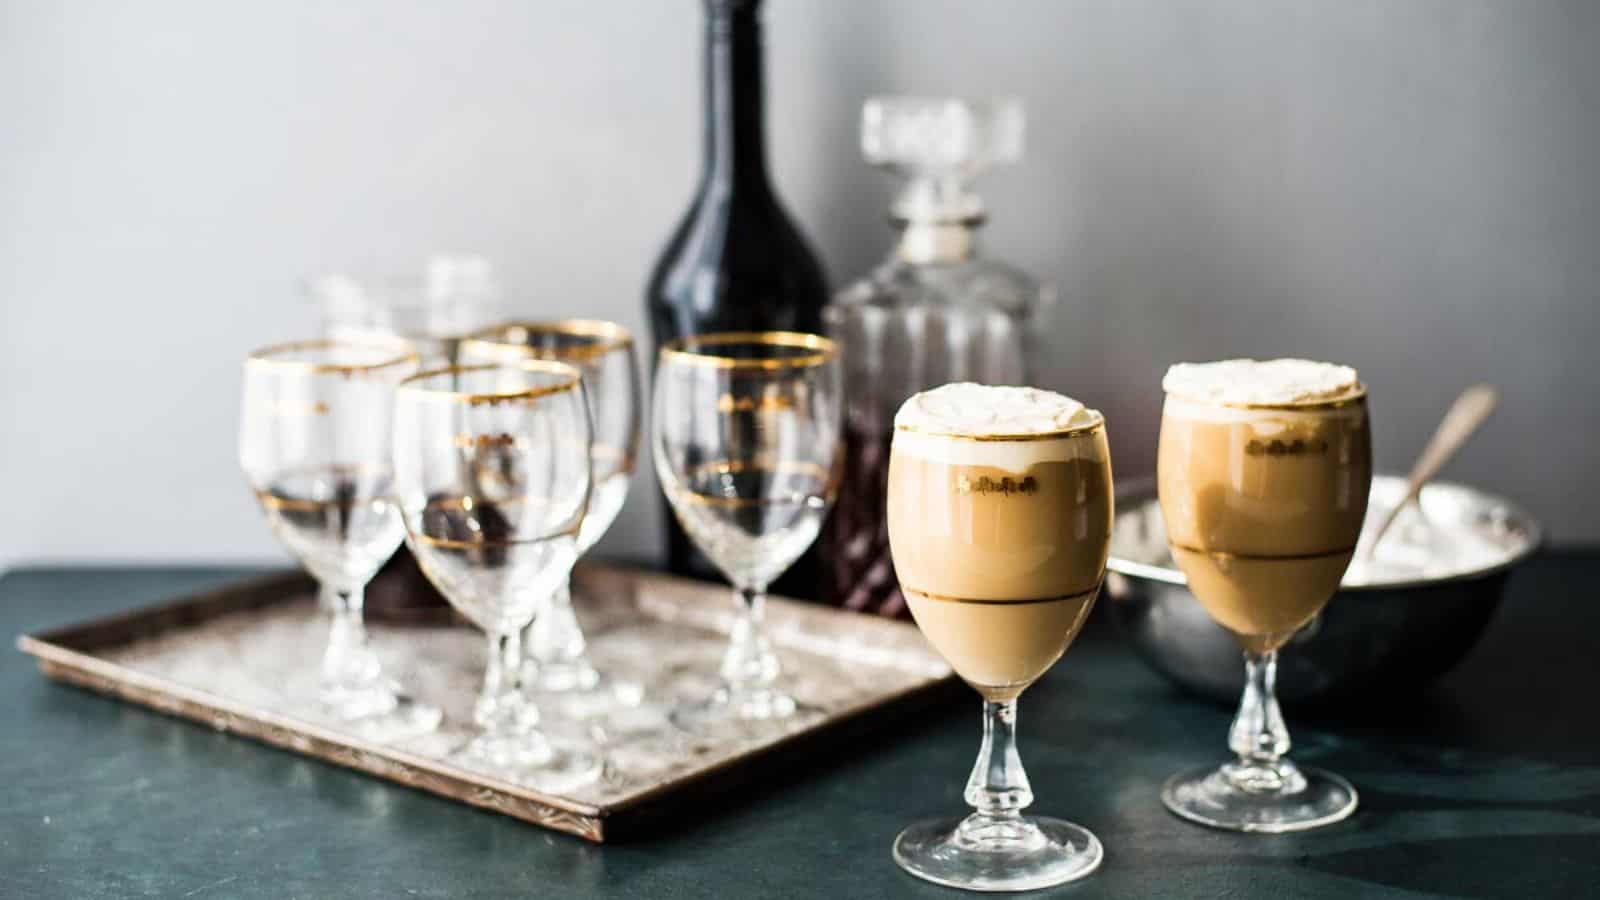 <p>The Irish Cream Coffee is a golden blend that even leprechauns would want to keep above ground. Ready in 5 minutes, it combines hot coffee and Irish cream for a smooth, luxurious sip. The milder Irish spirit in this creamy beverage complements the boldness of the coffee, offering a sweet treat.<br><strong>Get the Recipe: </strong><a href="https://reneenicoleskitchen.com/irish-cream-coffee/?utm_source=msn&utm_medium=page&utm_campaign=12%20golden%20recipes%20you%20know%20leprechauns%20would%20never%20bury">Irish Cream Coffee</a></p>